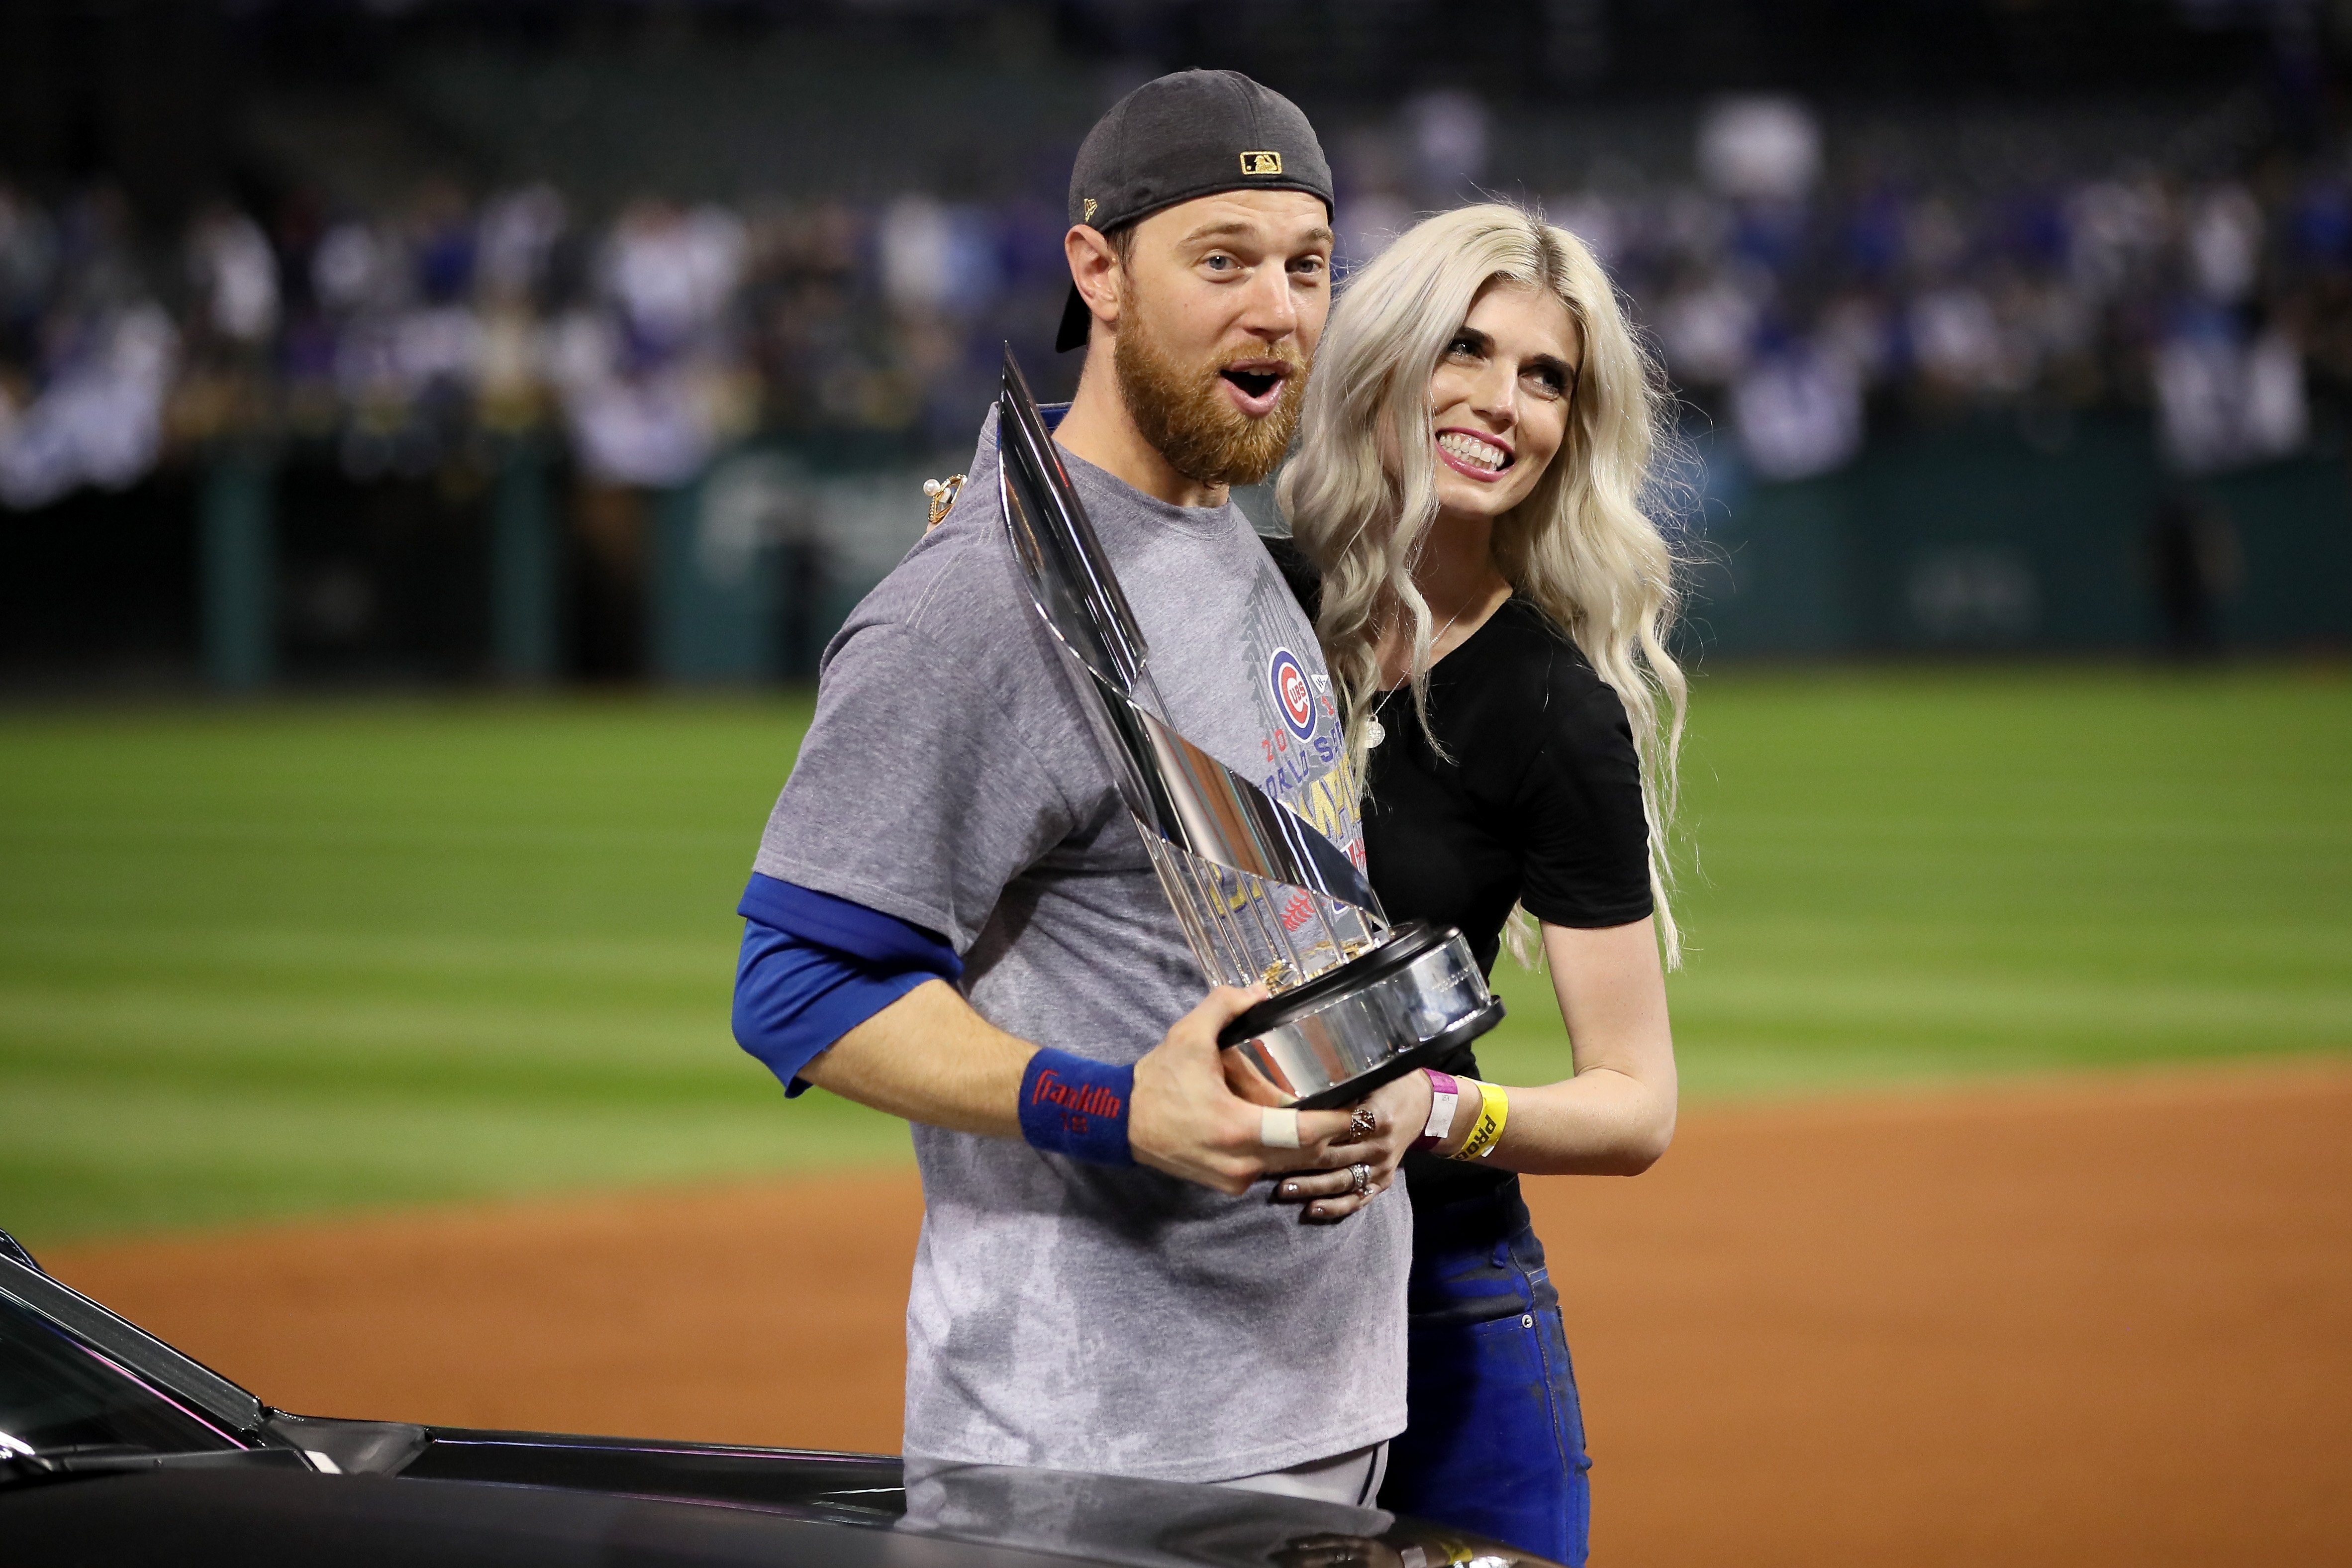 2016 World Series MVP Ben Zobrist #18 of the Chicago Cubs celebrates with his wife Julianna Zobrist on November 2, 2016, in Cleveland, Ohio. | Source: Getty Images